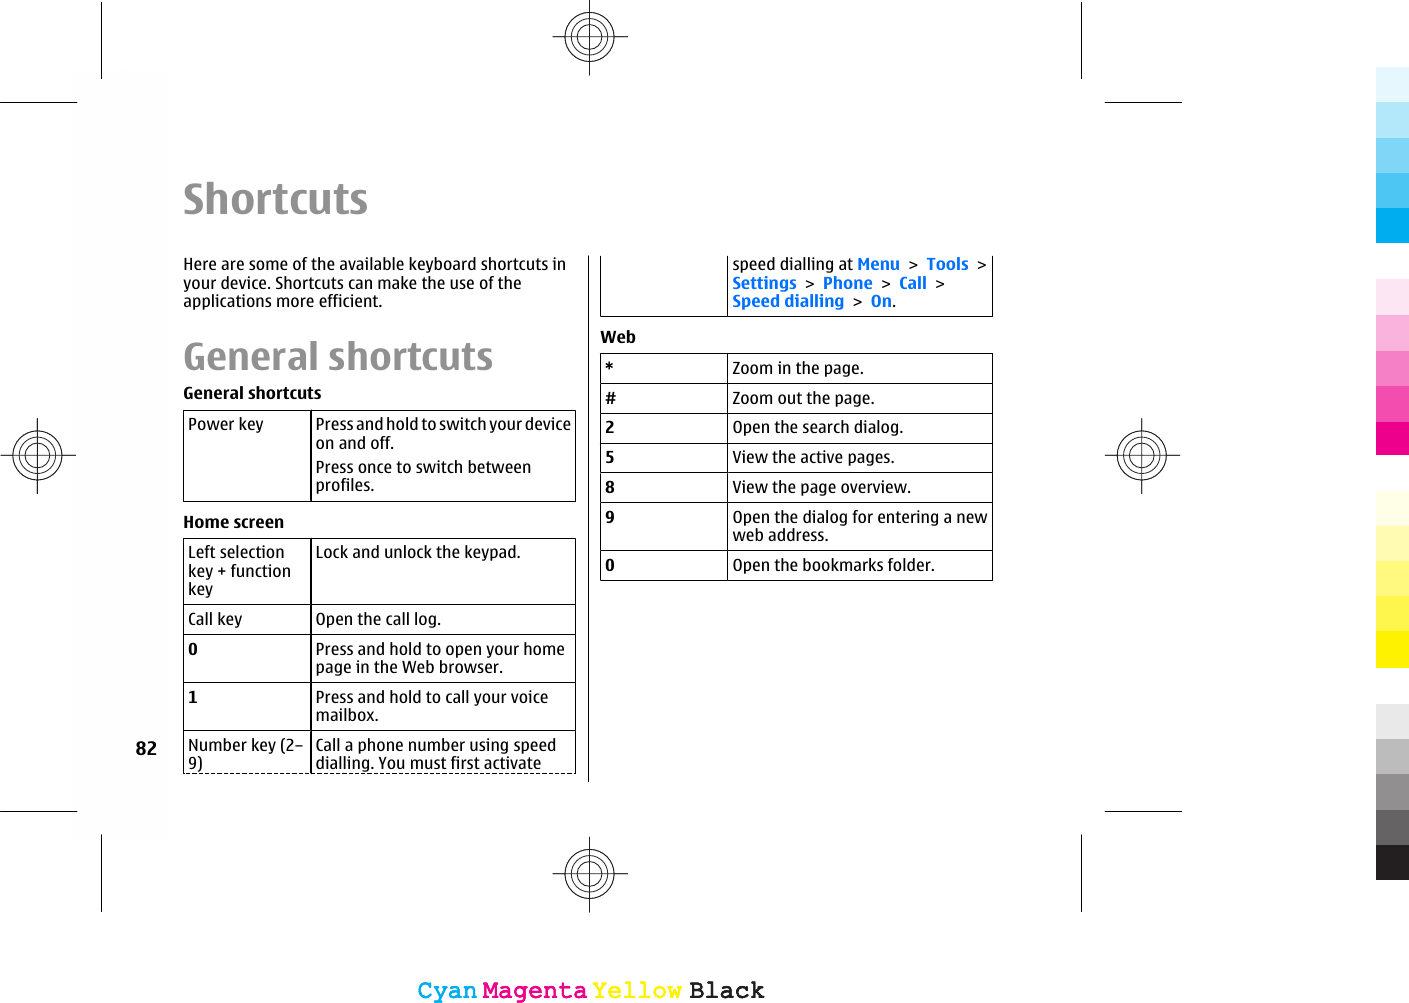 ShortcutsHere are some of the available keyboard shortcuts inyour device. Shortcuts can make the use of theapplications more efficient.General shortcutsGeneral shortcutsPower key Press and hold to switch your deviceon and off.Press once to switch betweenprofiles.Home screenLeft selectionkey + functionkeyLock and unlock the keypad.Call key Open the call log.0Press and hold to open your homepage in the Web browser.1Press and hold to call your voicemailbox.Number key (2–9)Call a phone number using speeddialling. You must first activatespeed dialling at Menu &gt; Tools &gt;Settings &gt; Phone &gt; Call &gt;Speed dialling &gt; On.Web*Zoom in the page.#Zoom out the page.2Open the search dialog.5View the active pages.8View the page overview.9Open the dialog for entering a newweb address.0Open the bookmarks folder.82CyanCyanMagentaMagentaYellowYellowBlackBlackCyanCyanMagentaMagentaYellowYellowBlackBlack